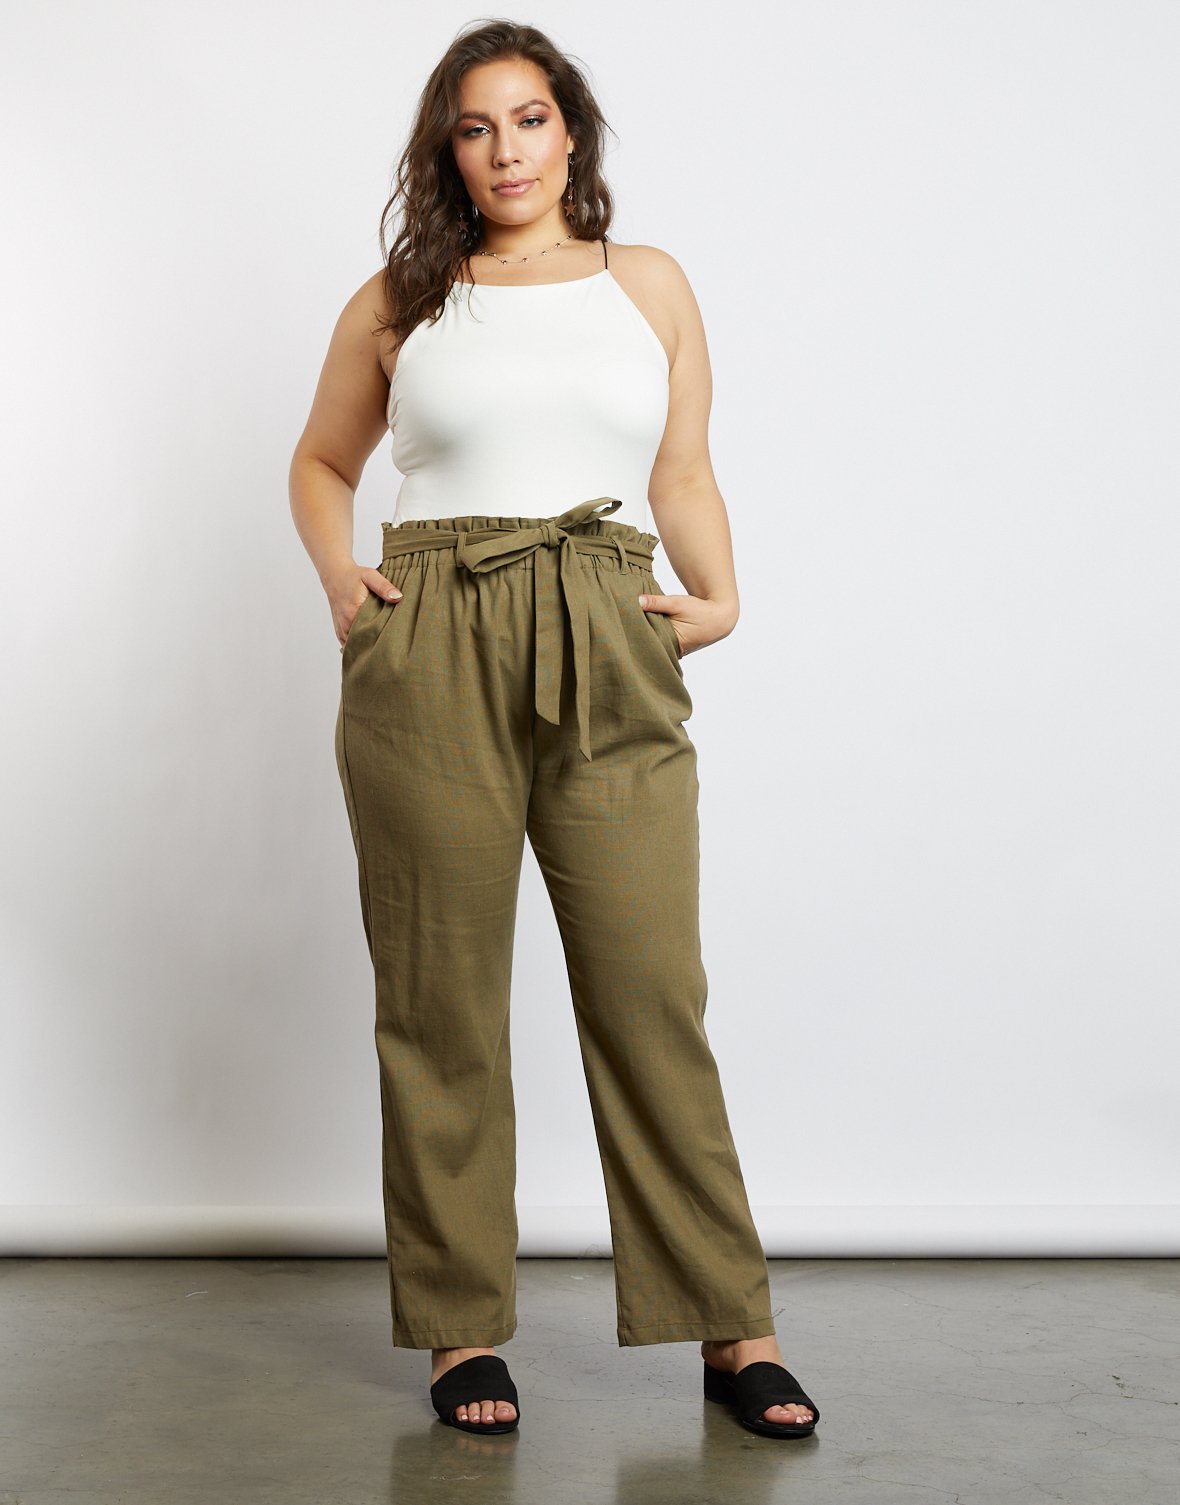 high waisted pants on plus size